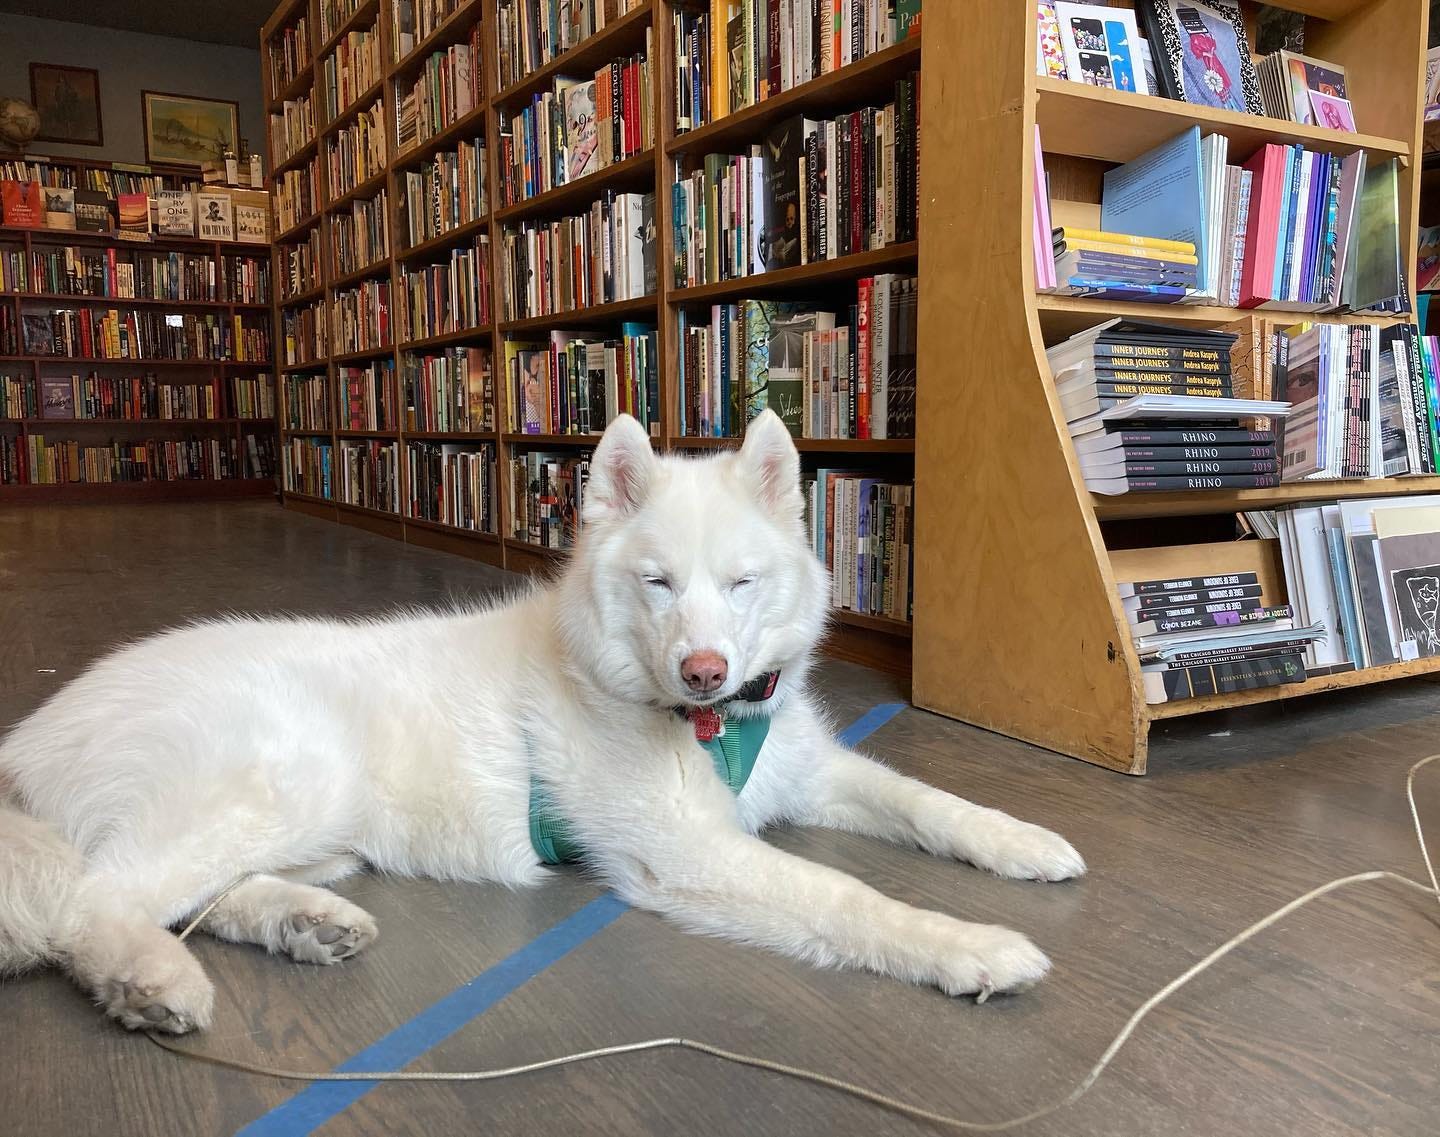 White husky Ramona lies on the floor in front of the middle path between bookcases